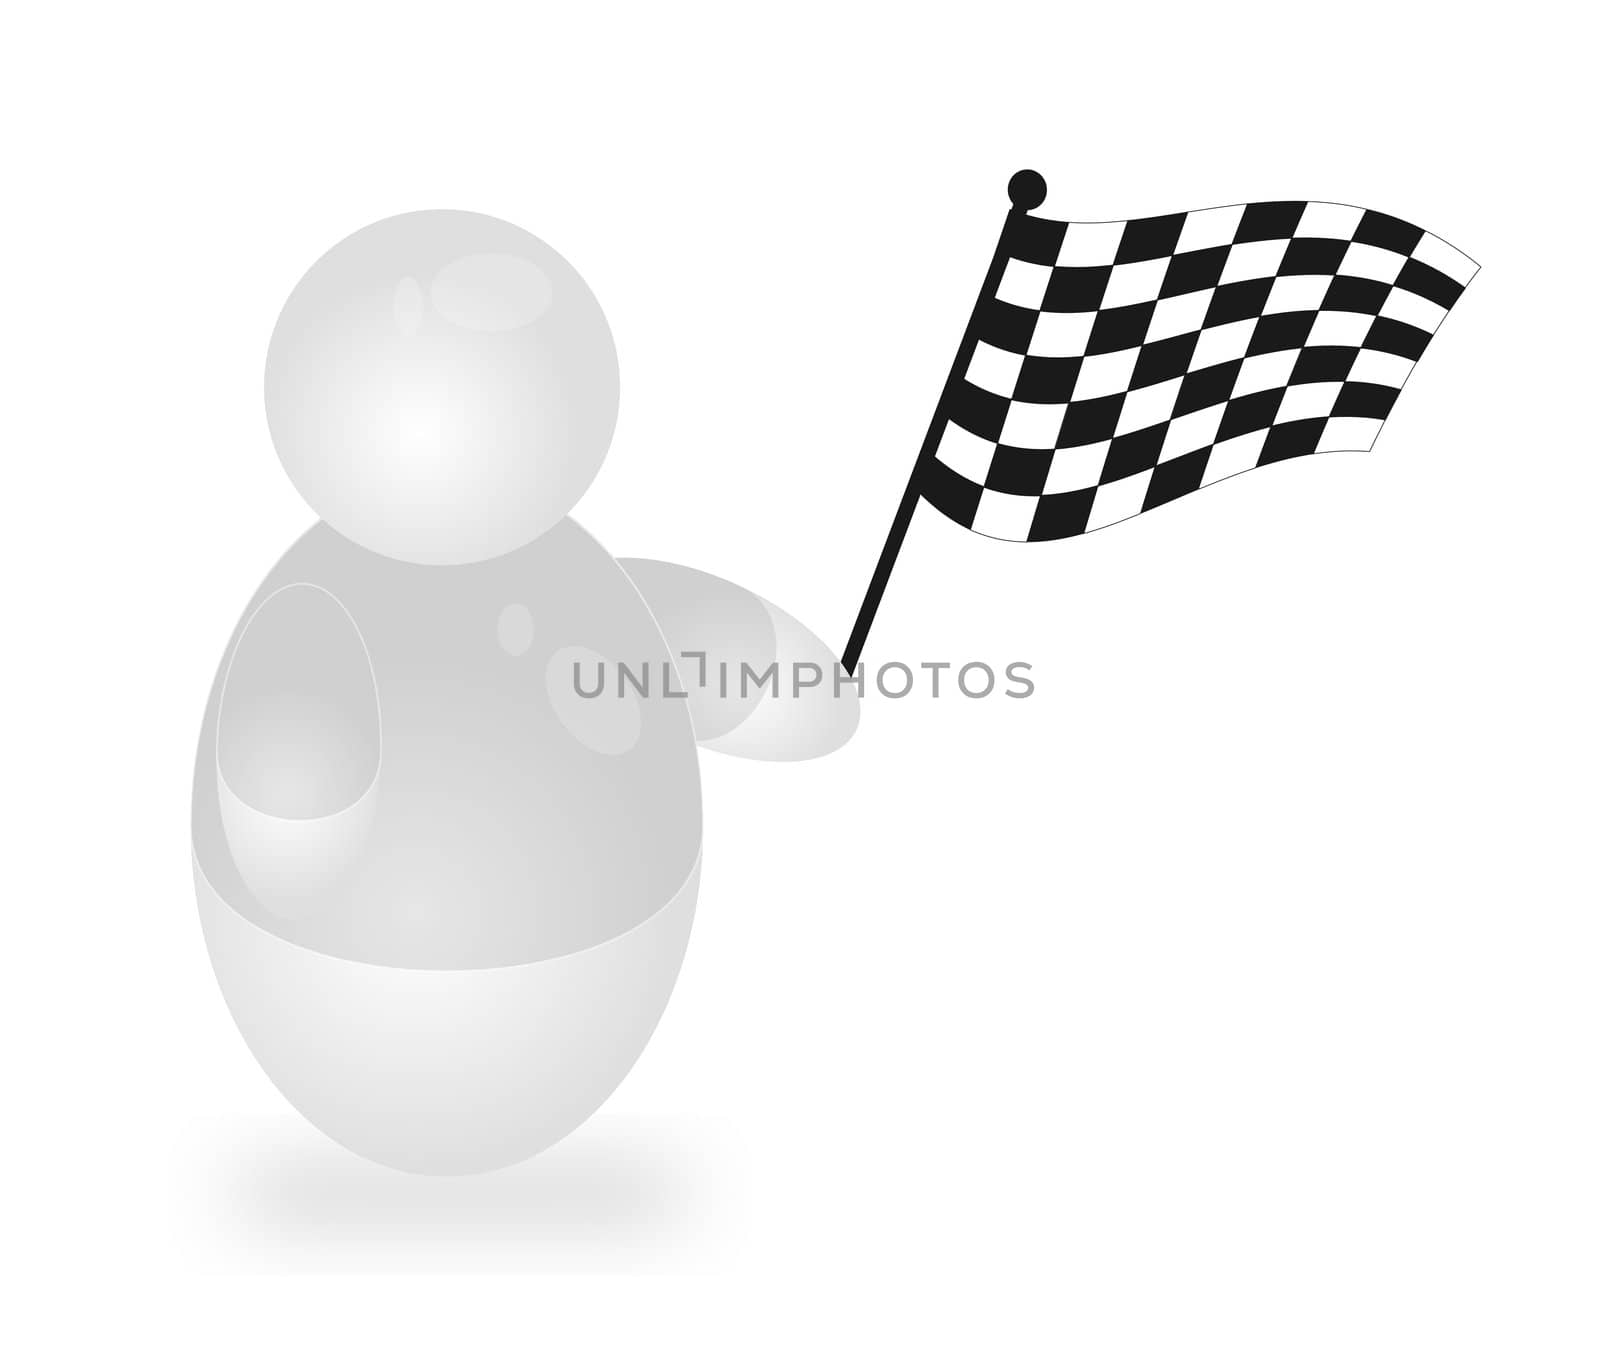 A stylized person holding a chequered flag. All isolated on white background.